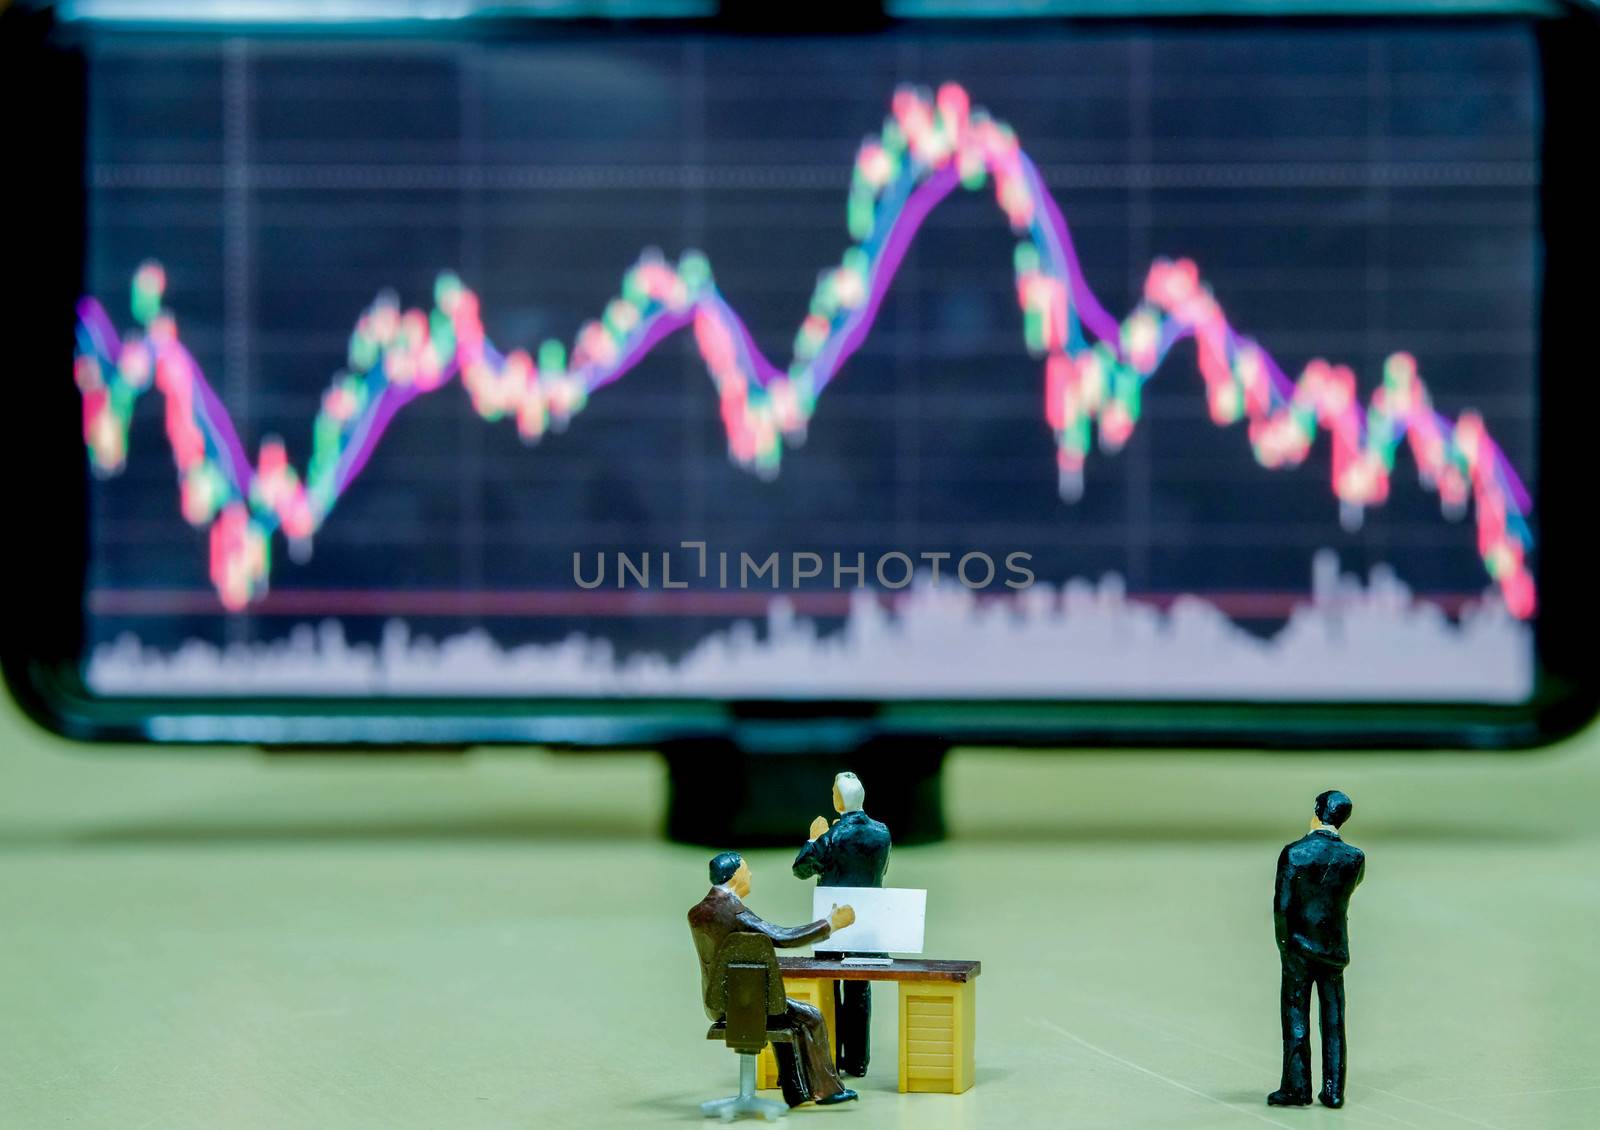 Miniature figure business people or Stock Trader looking at Blur by Bonn2210